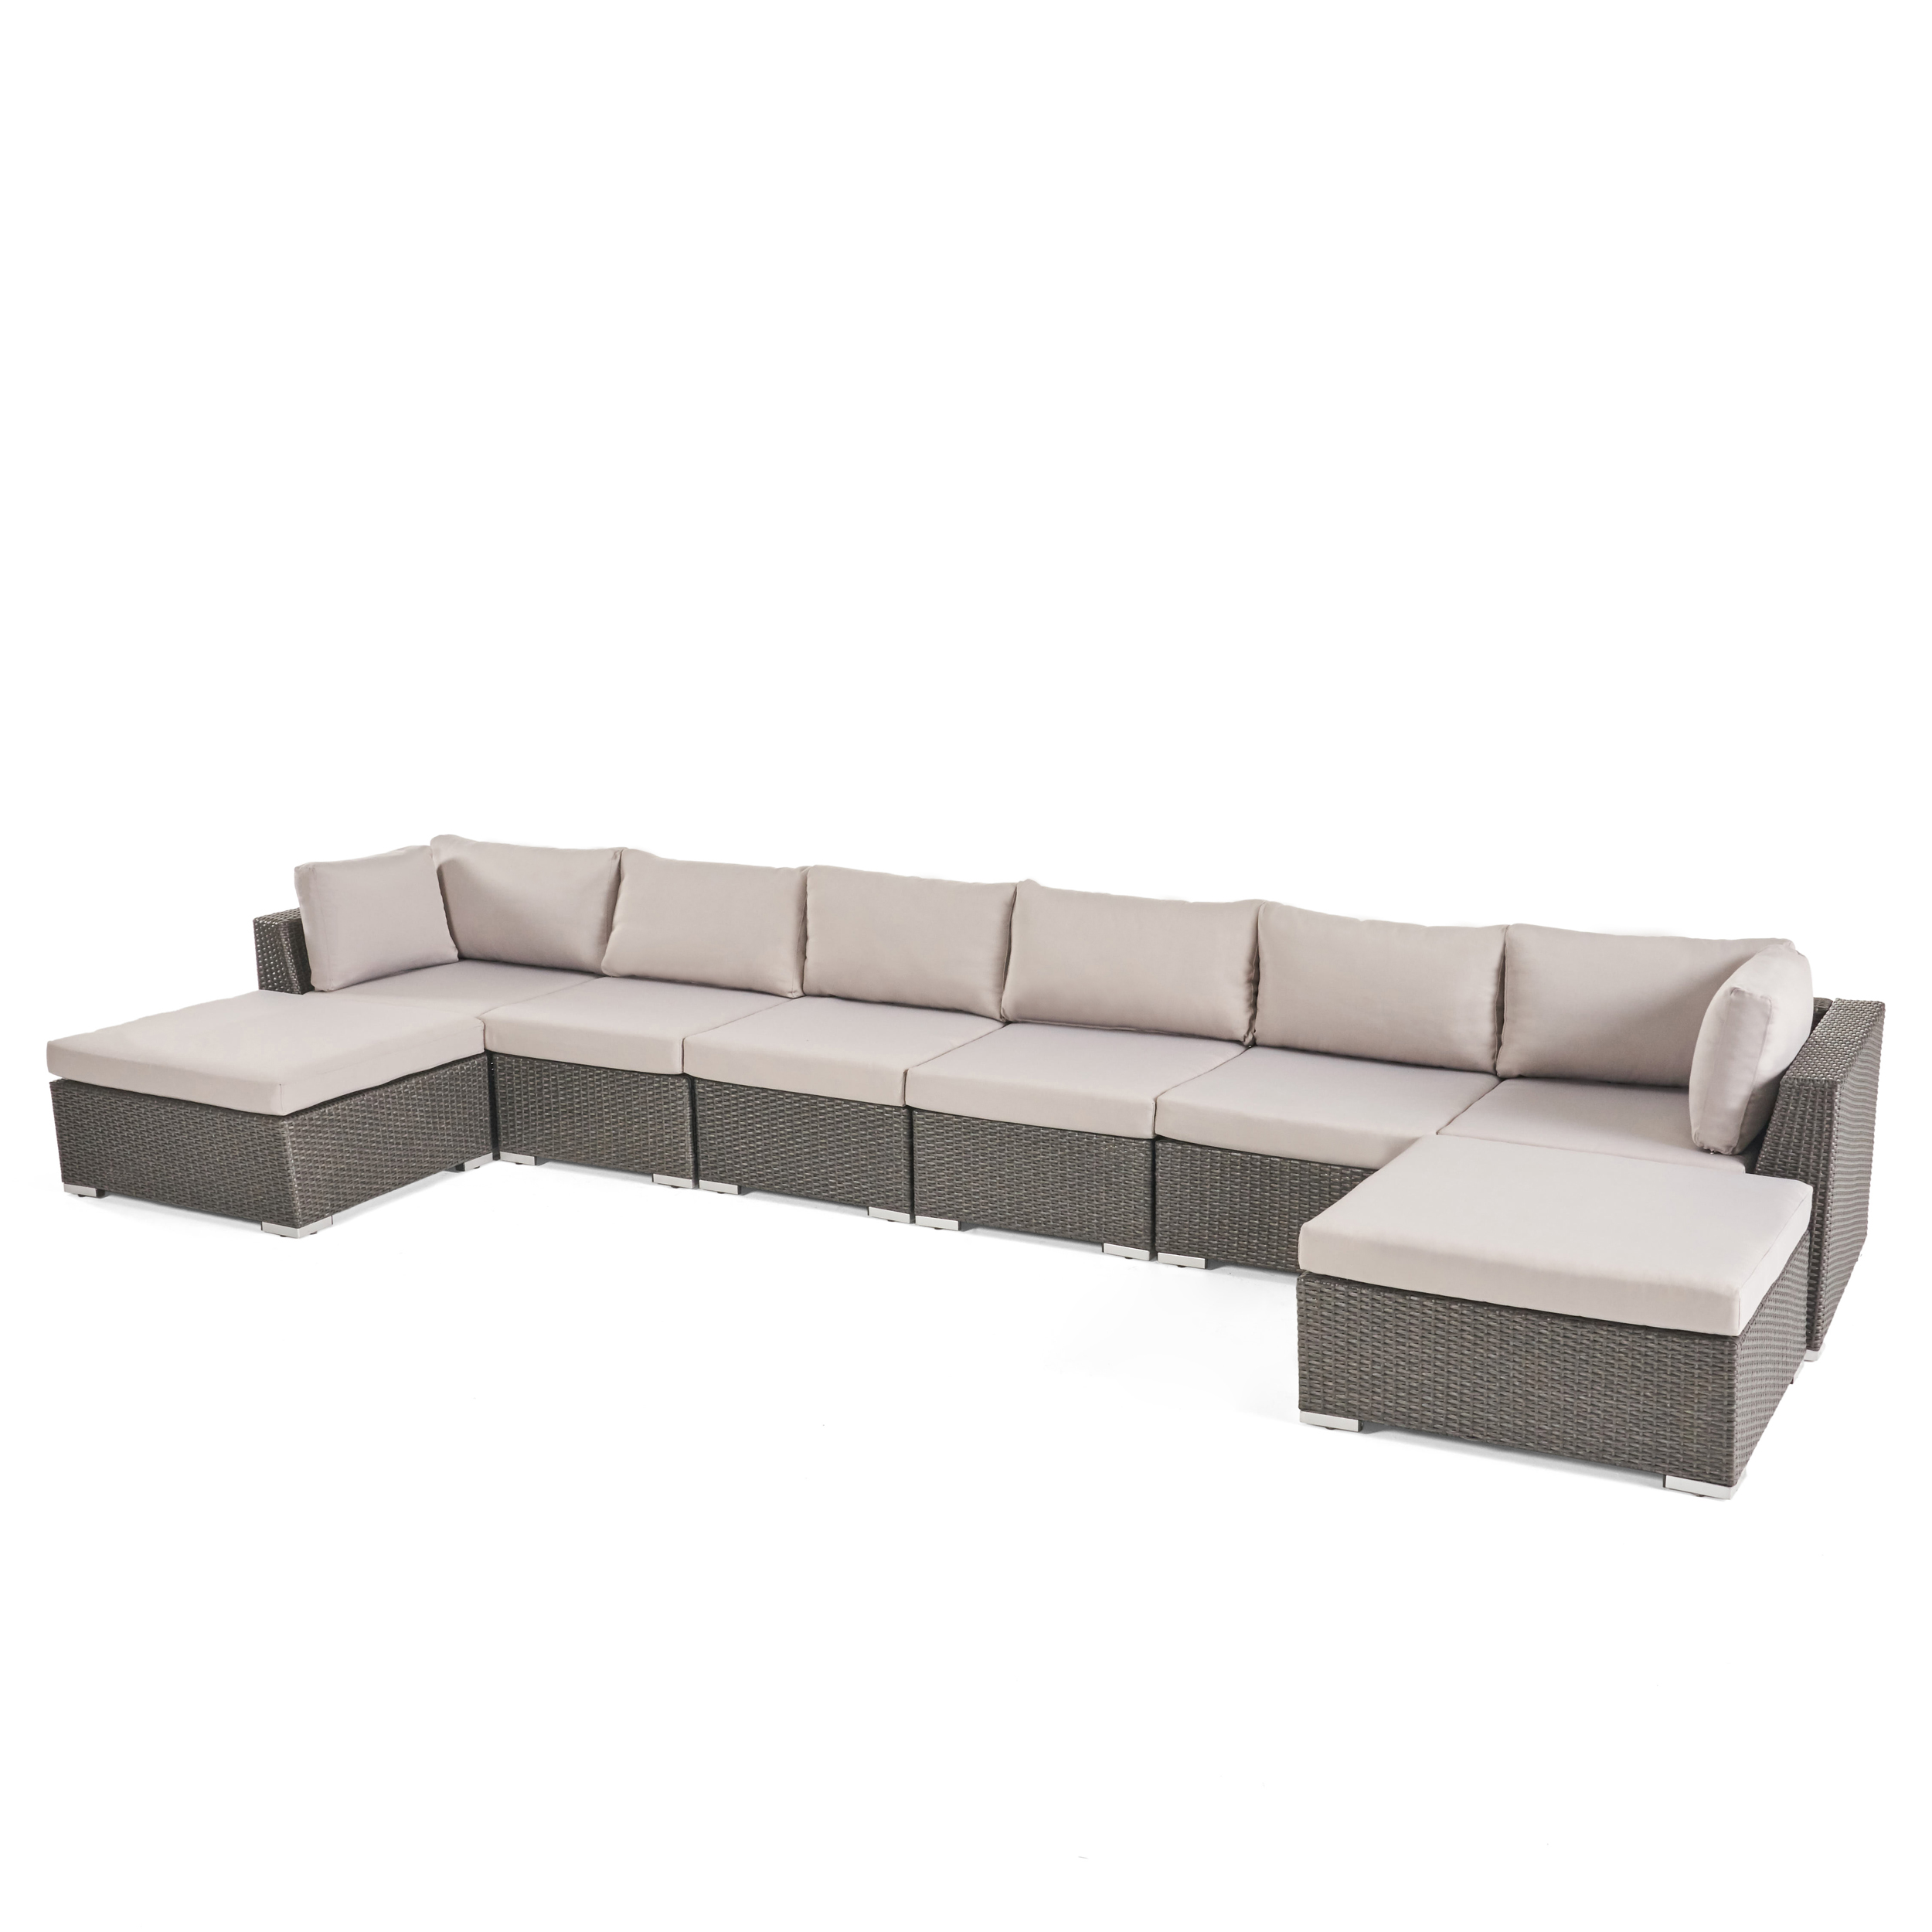 Ameer Outdoor 8 Piece Wicker Sectional Set With Cushions, Grey, Silver - image 5 of 5